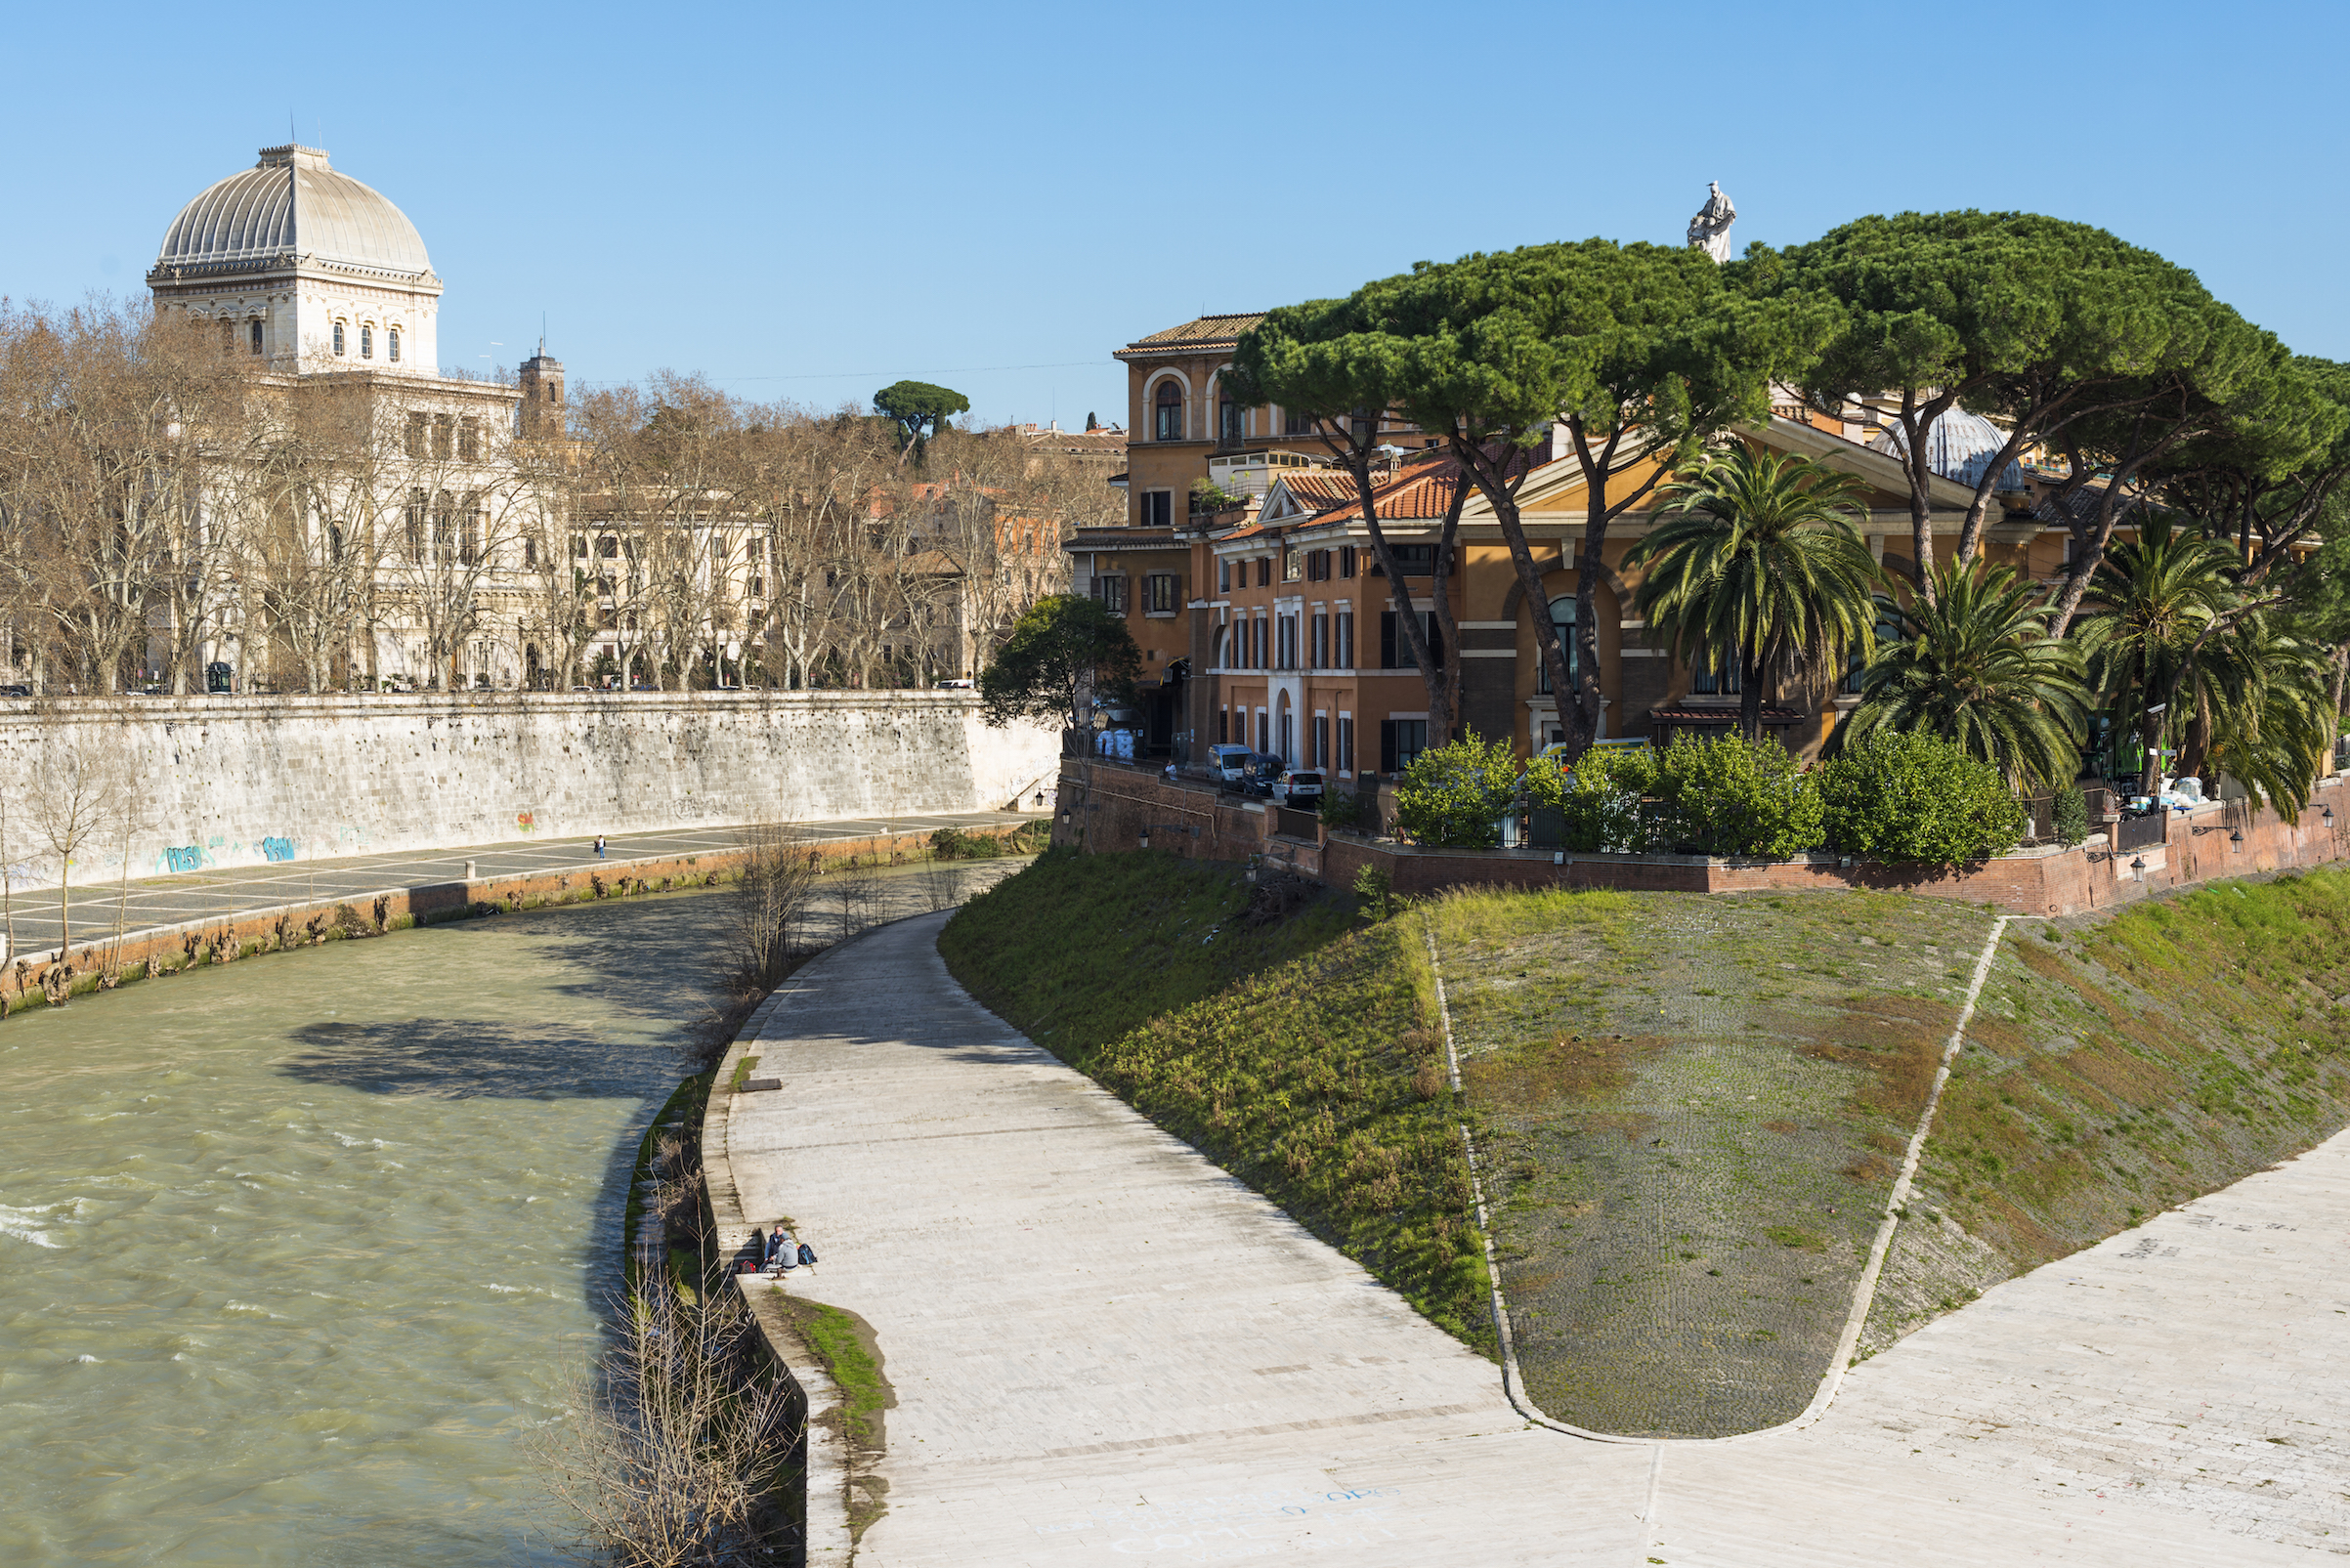 In the middle of Rome's Tiber River is the small island, Isola Tiberina. Fatebenefratelli Hospital is seen on the on western side and a synagogue on left. 2018. (Education Images/UIG/Getty Images)